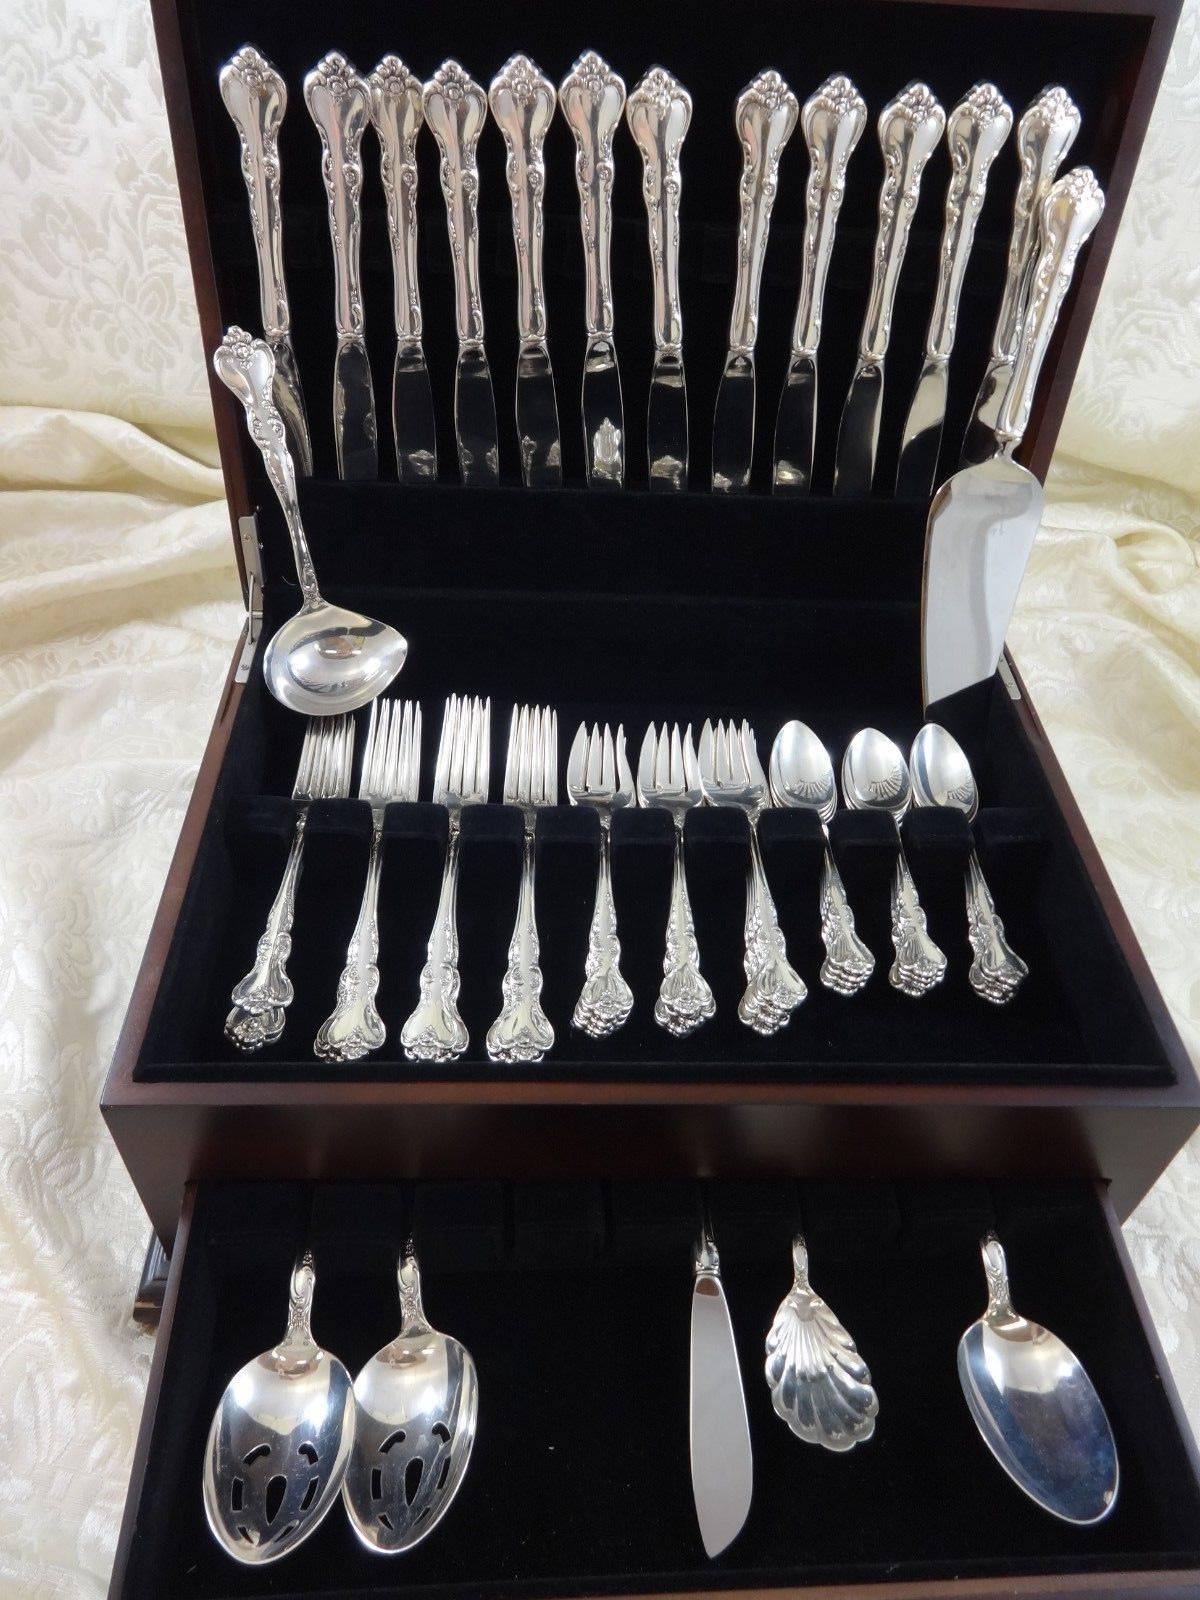 SAVANNAH BY REED & BARTON  Sterling Silver flatware set - 55 pieces.This set includes: 

12 KNIVES, 9 1/8